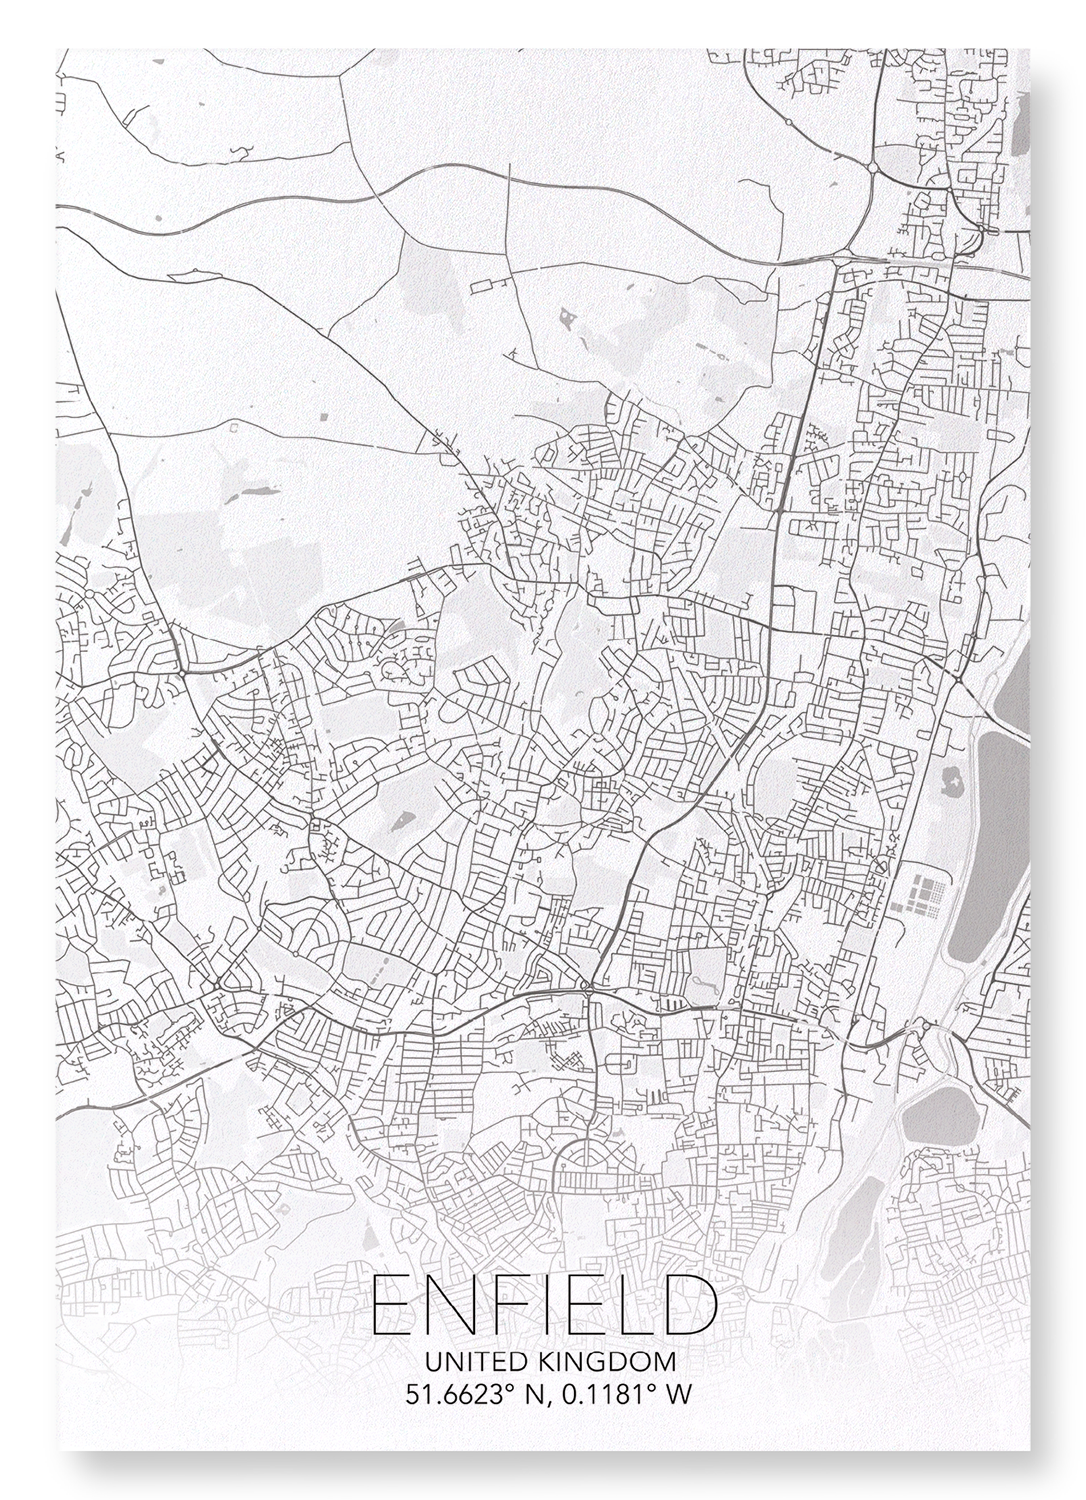 ENFIELD FULL MAP